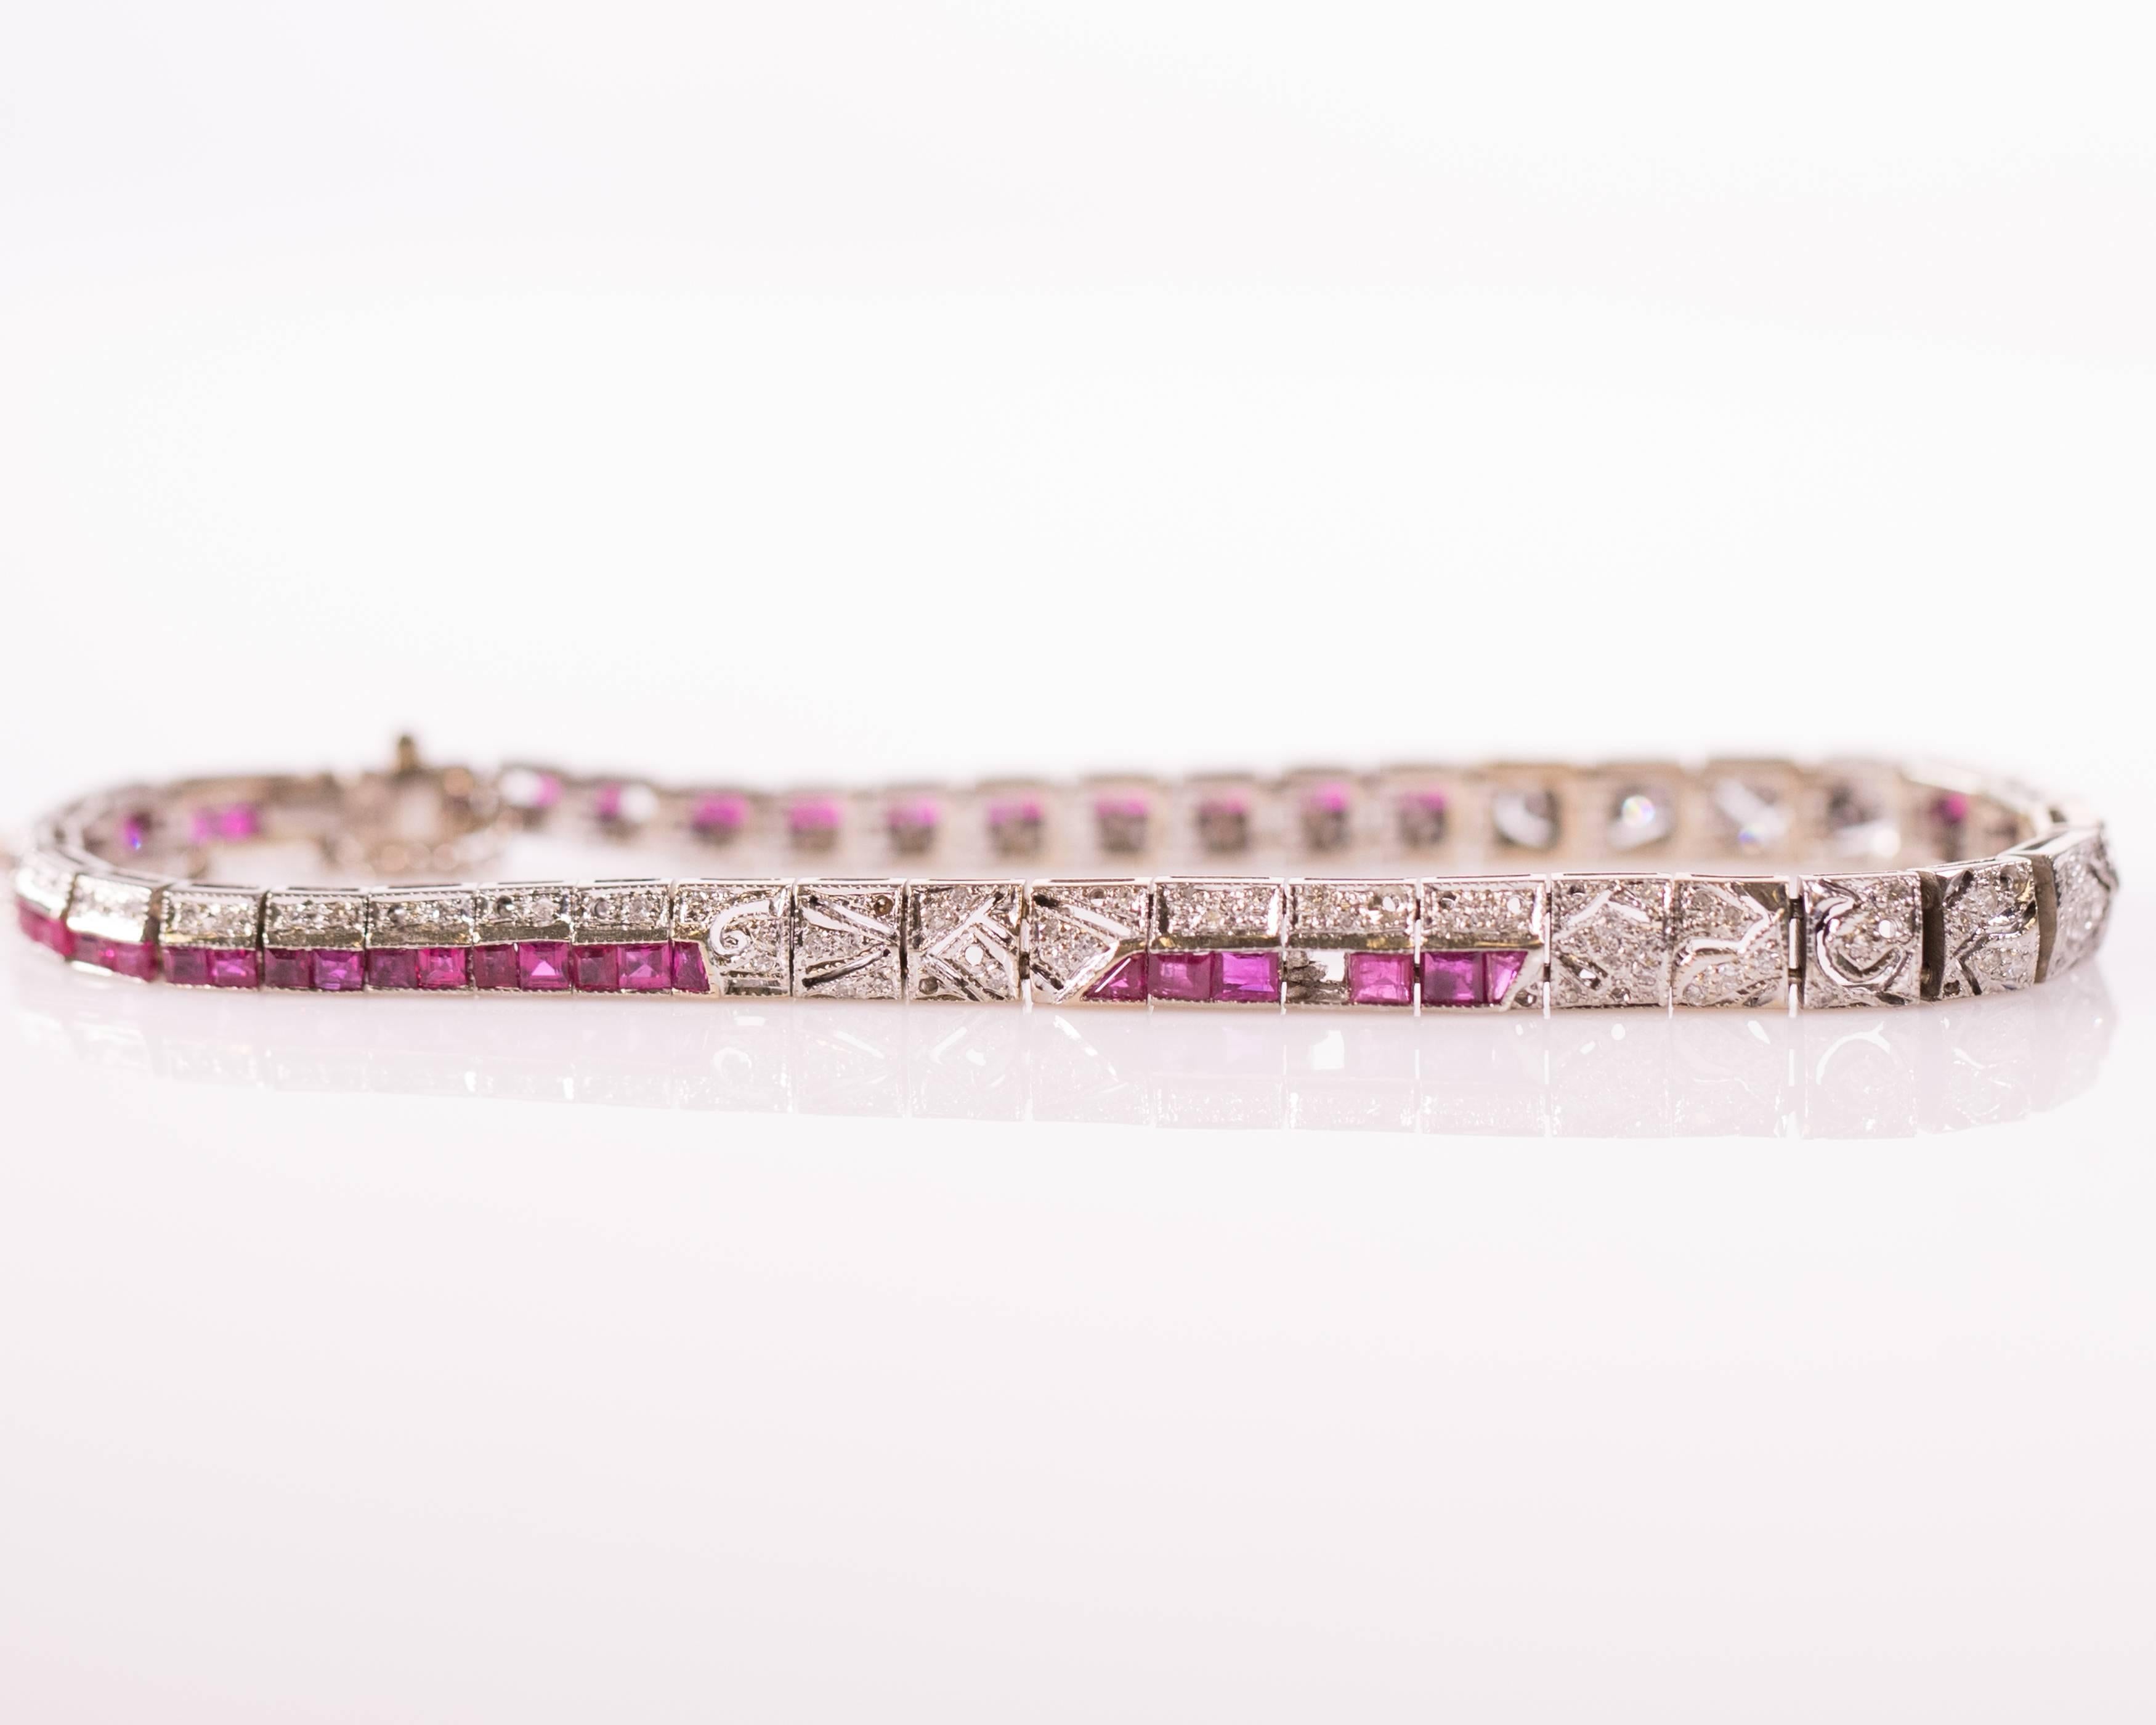 This 1925 Diamond and Ruby Bracelet exemplifies true Art Deco style and artistry. French cut Rubies and Single cut Diamonds adorn this Platinum and 18 Karat White Gold masterpiece. Ruby and diamond segments alternate with delicately patterned